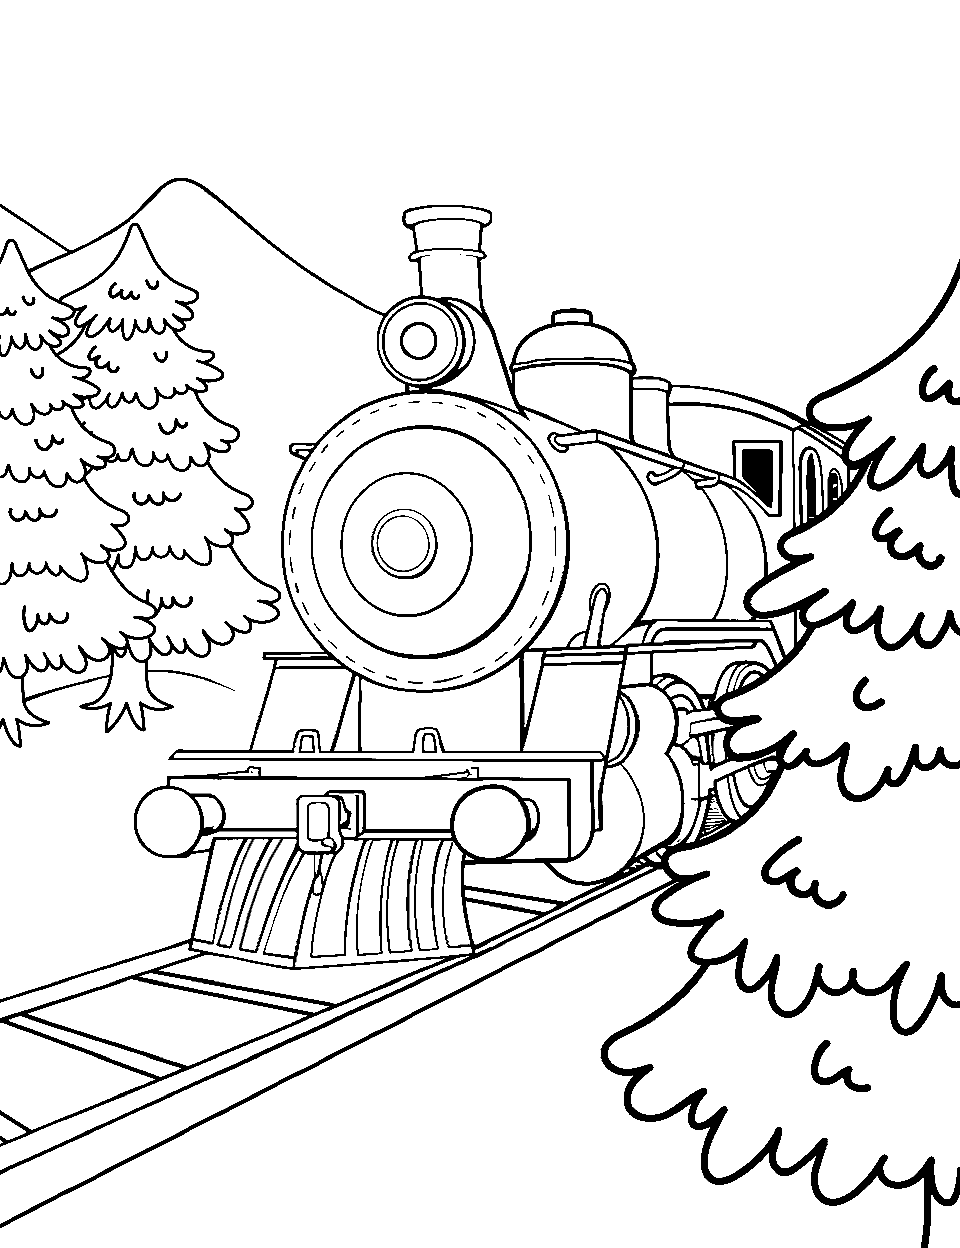 Polar Express in the Snow Coloring Page - The Polar Express train journeying through a snowy landscape.